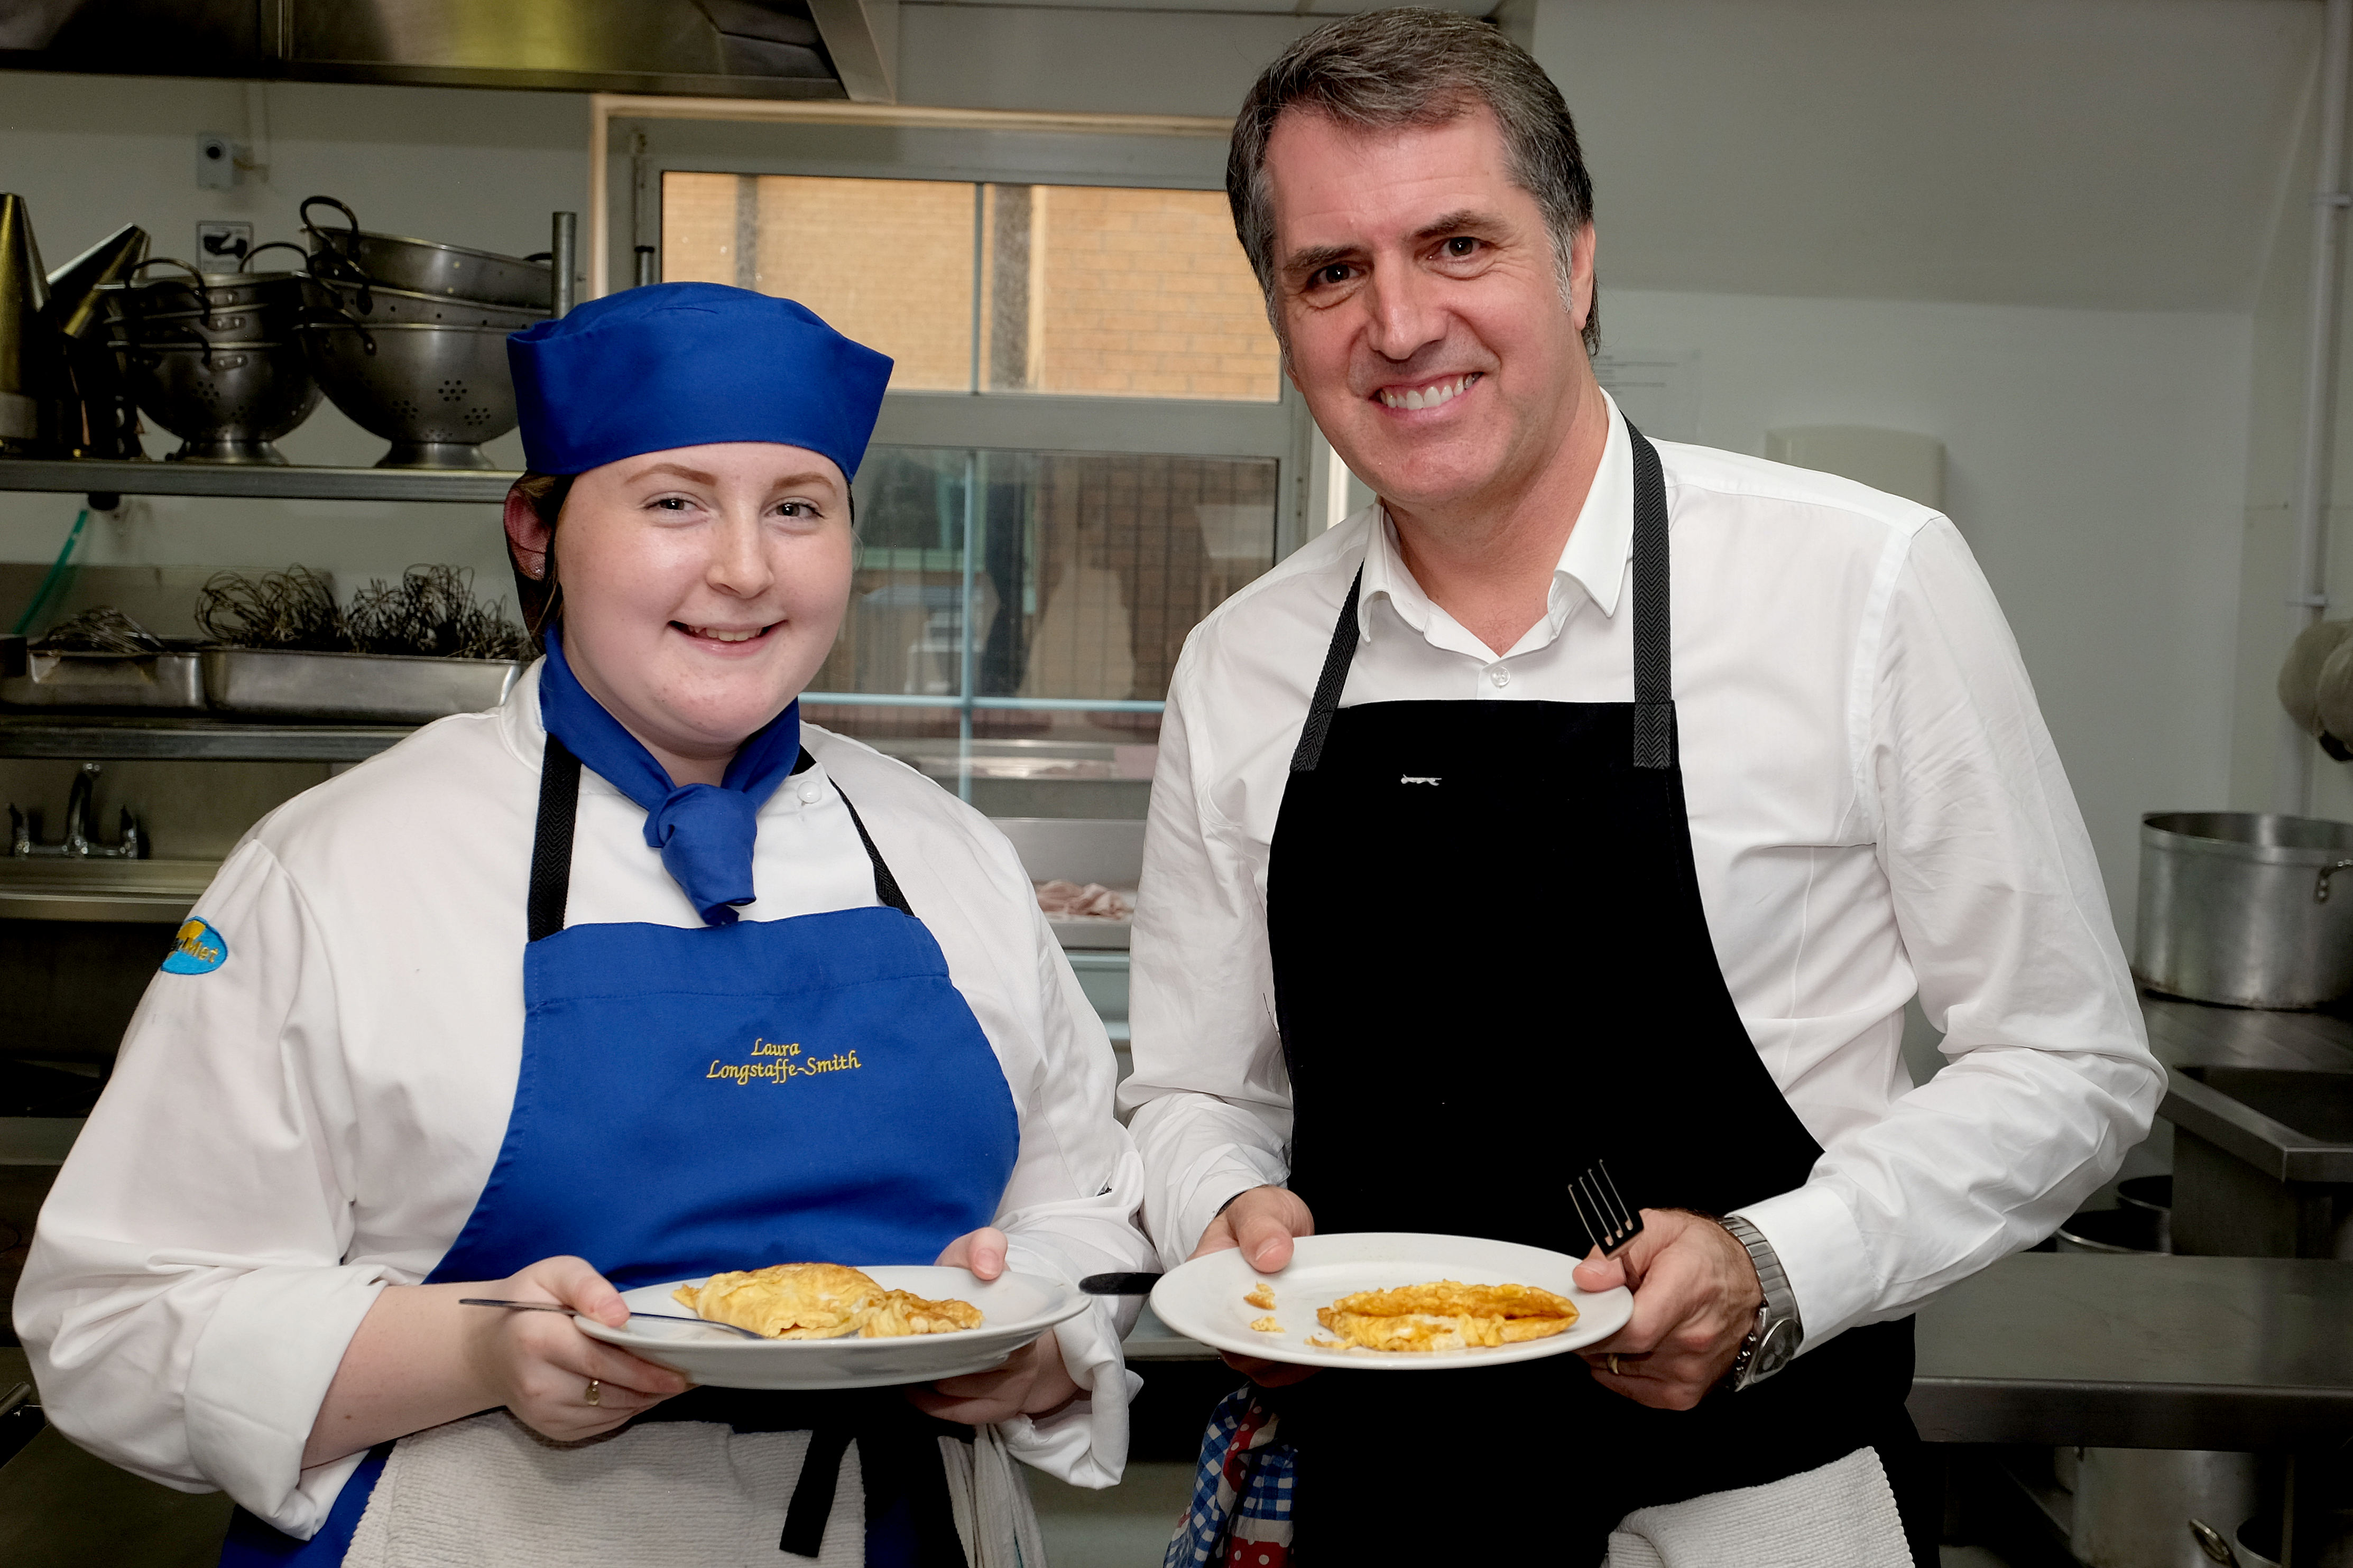 Metro Mayor Steve Rotheram wearing an apron and standing next to a Wirral met Hospitality and Catering student at the Conway Park campus